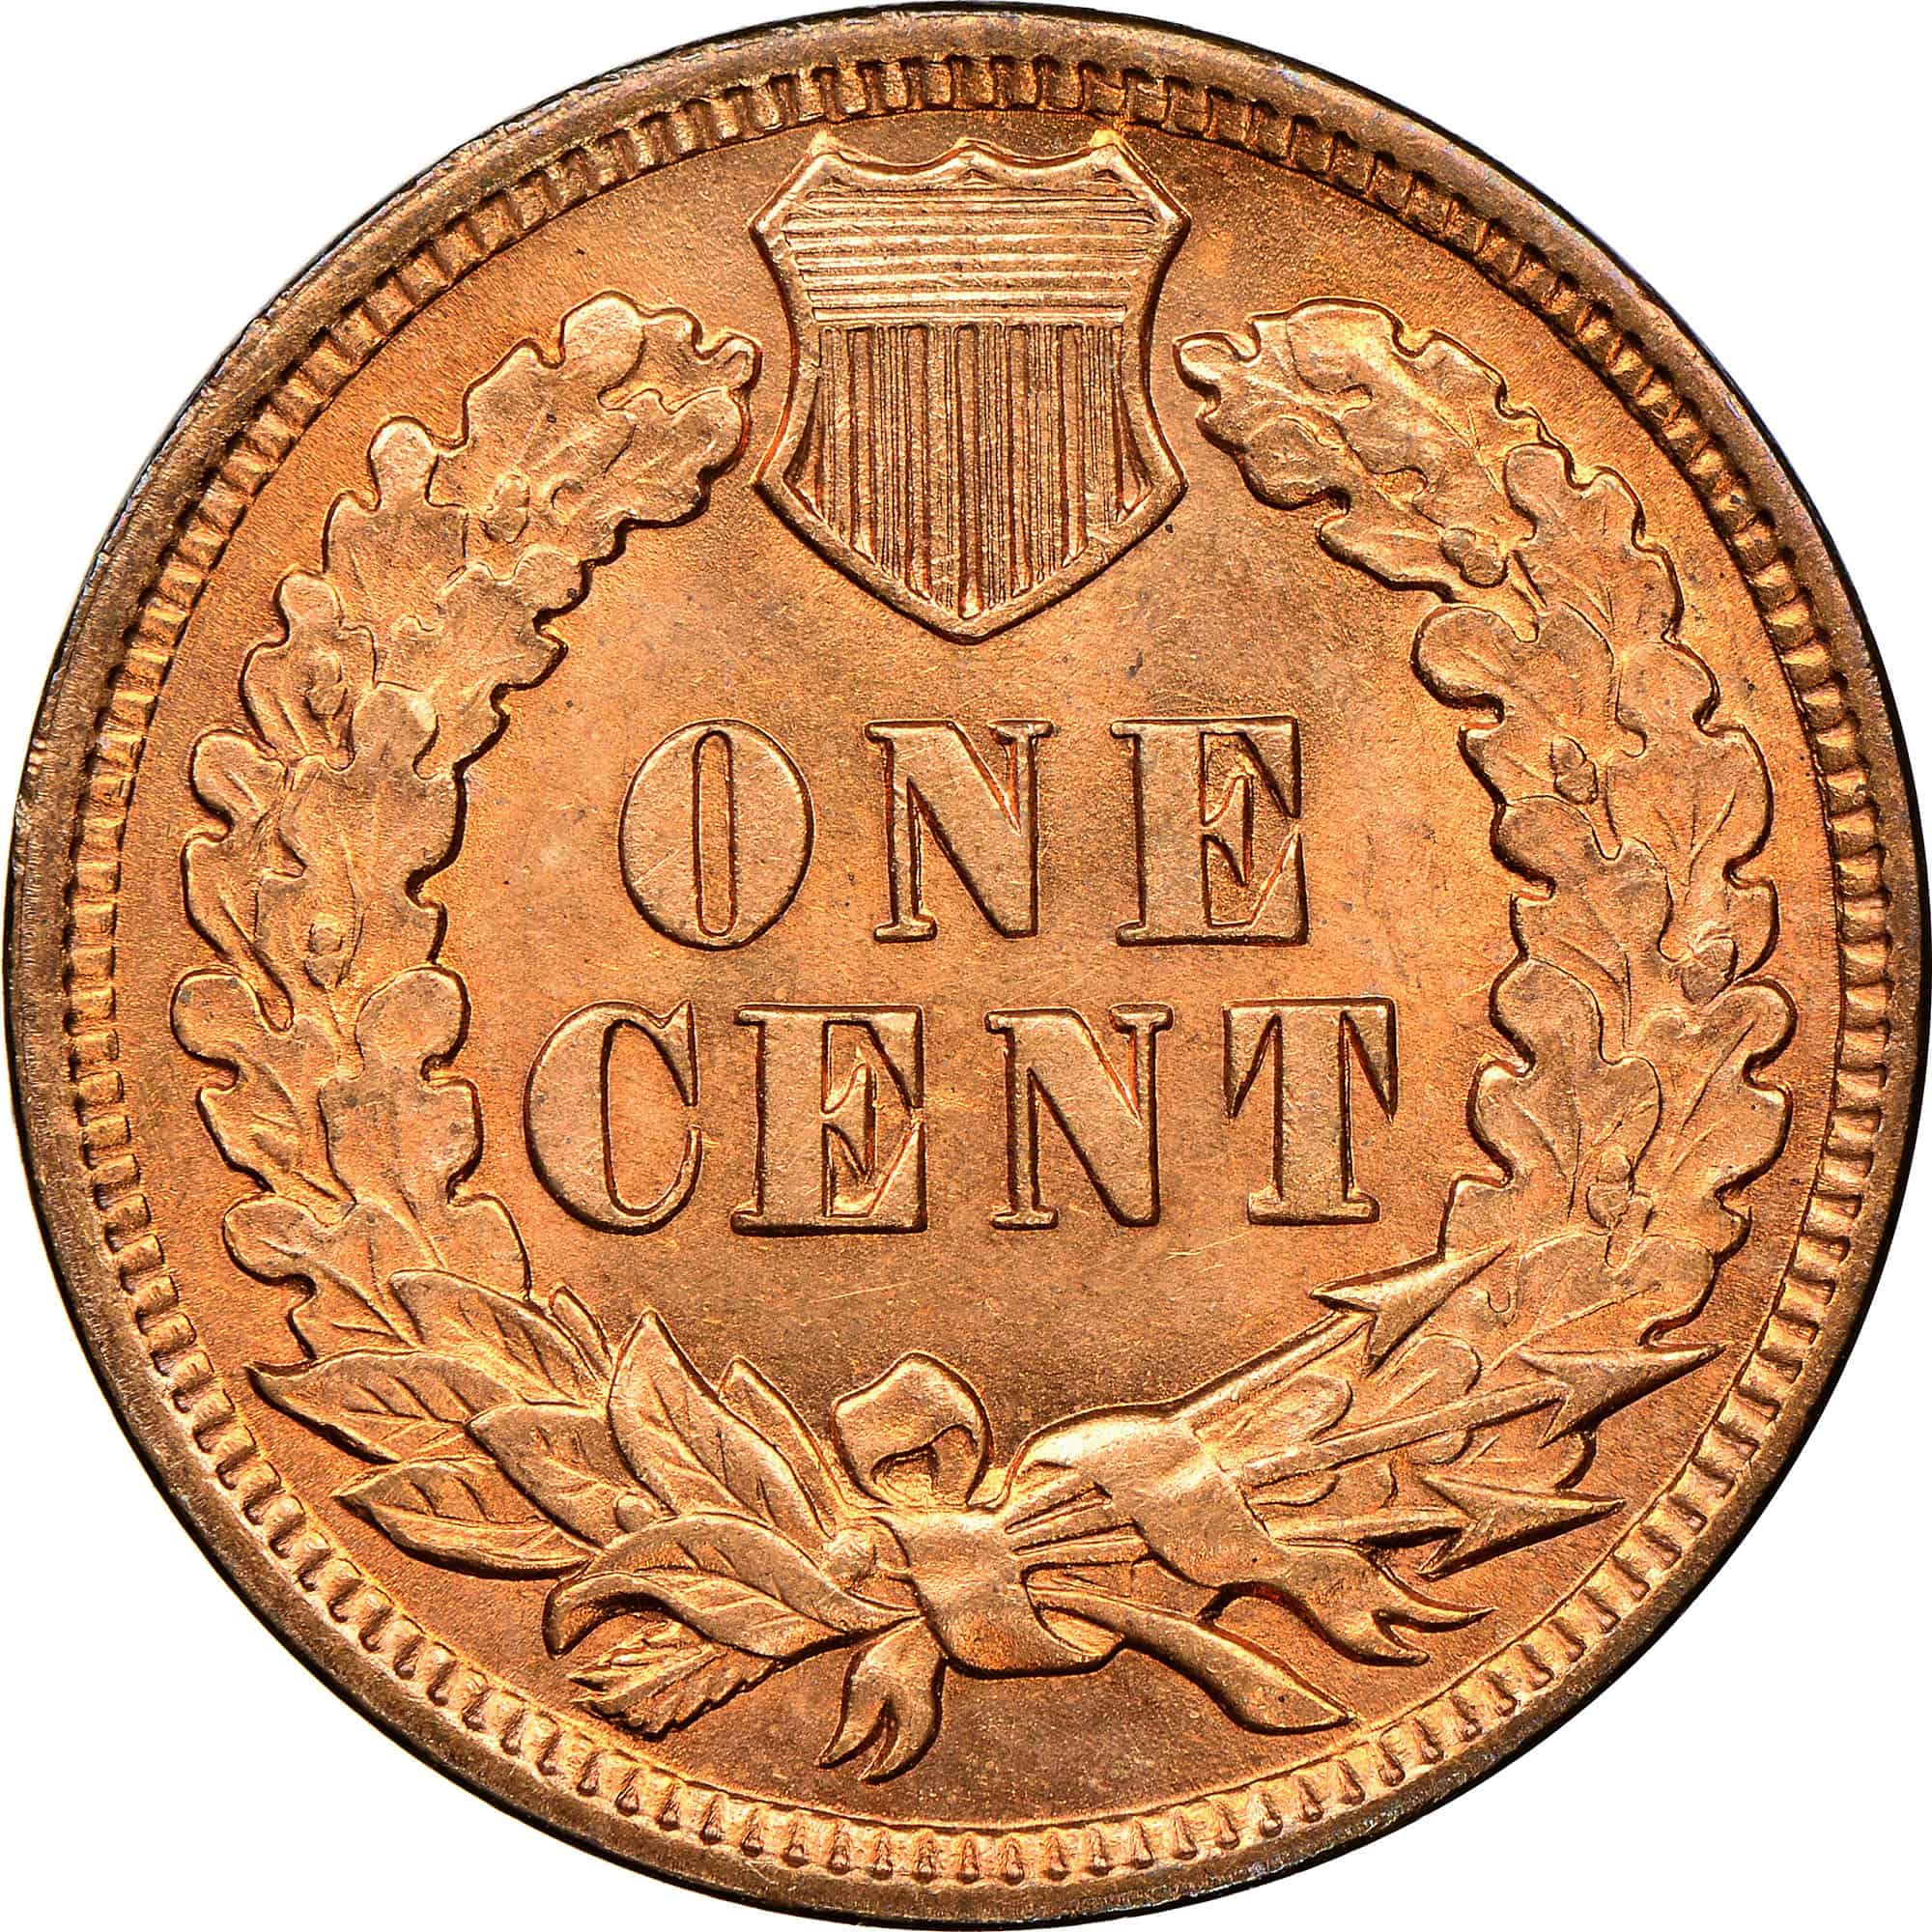 The Reverse of the 1908 Indian Head Penny